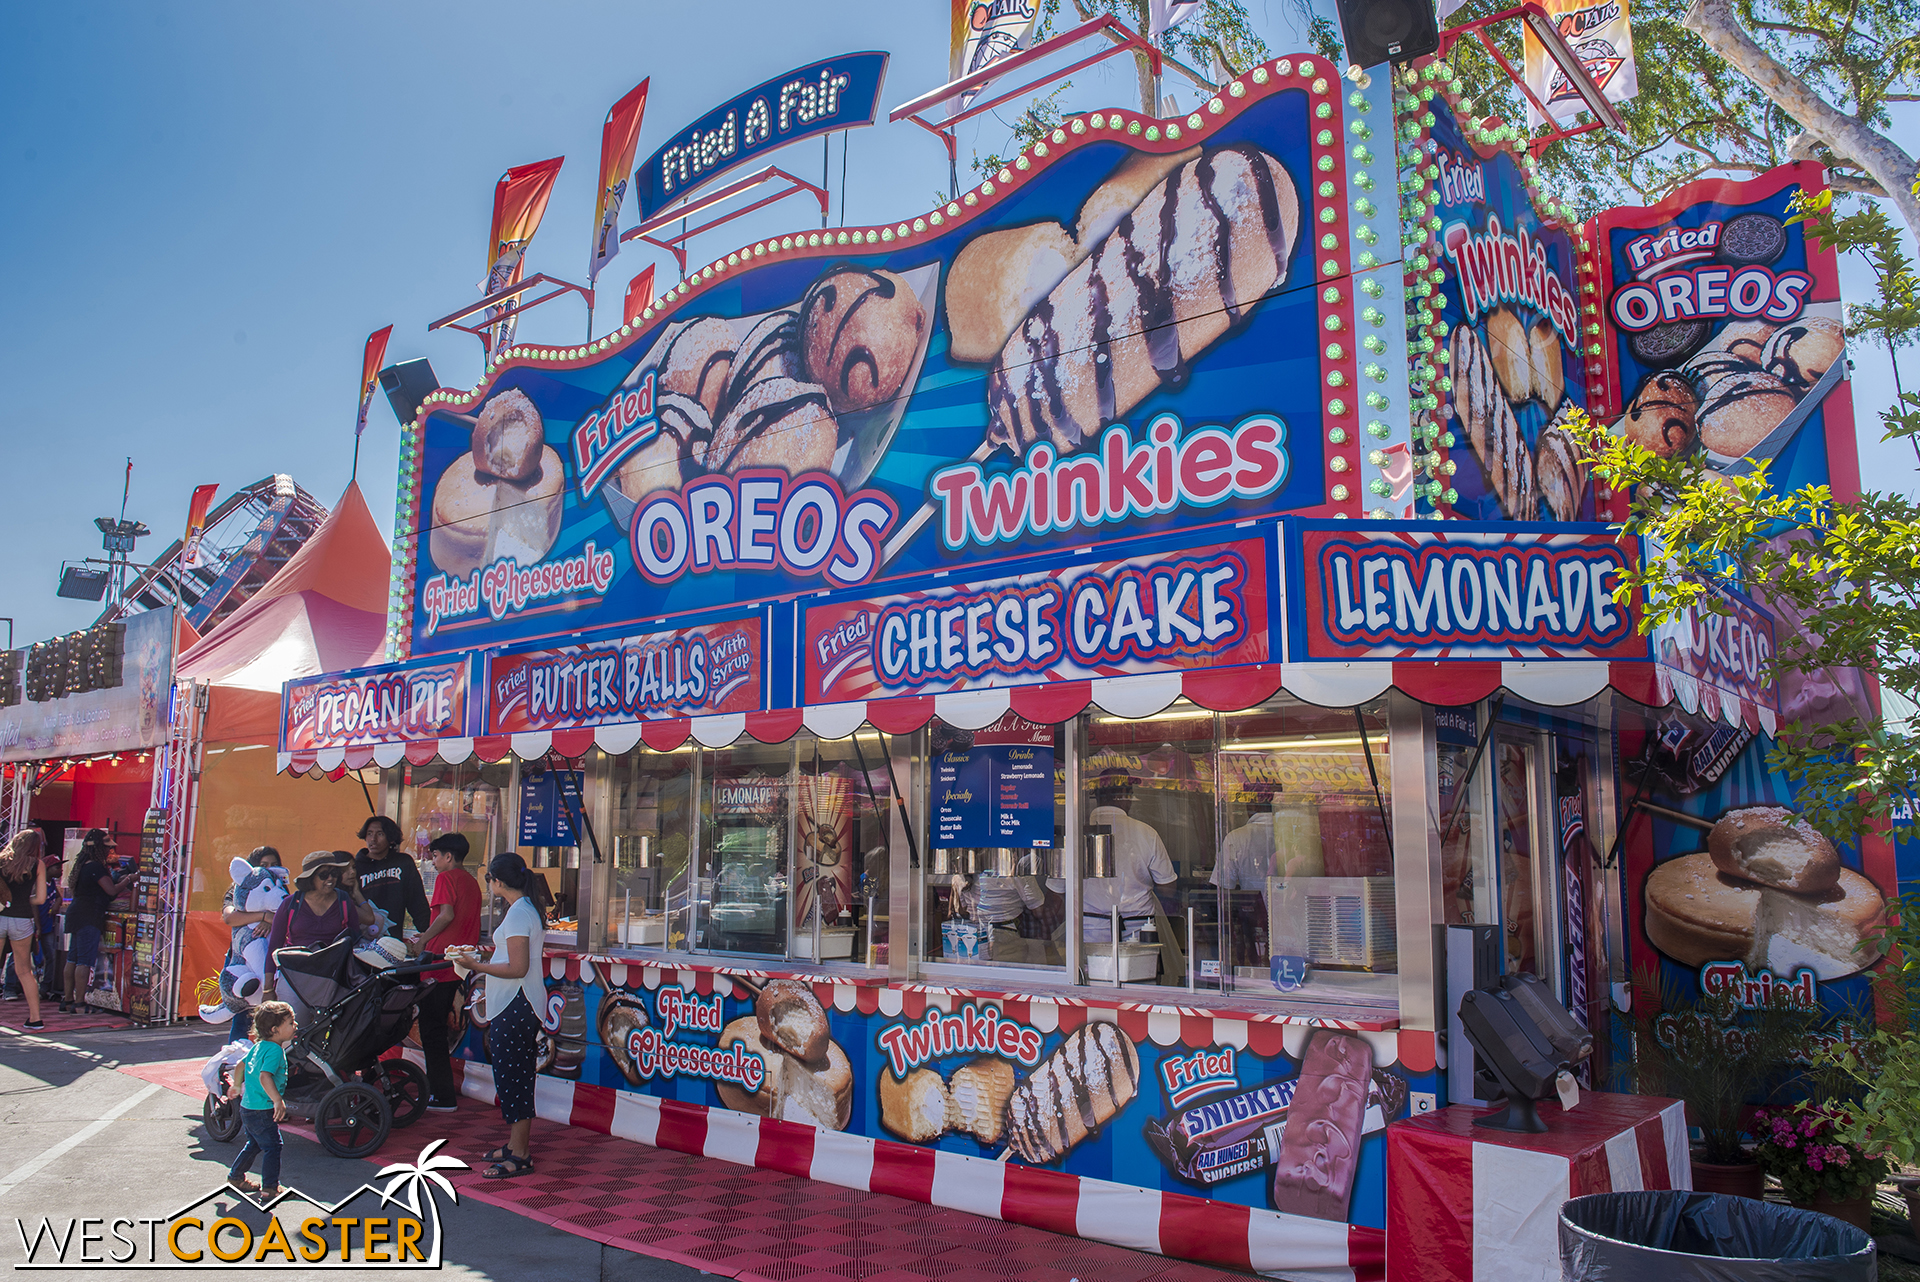  Fried A Fair has several stands around the OC Fair and plenty of deep friend desserts.  From past years’ experience, the Deep Fried Oreos are and Fried Cheesecake are actually pretty good. 